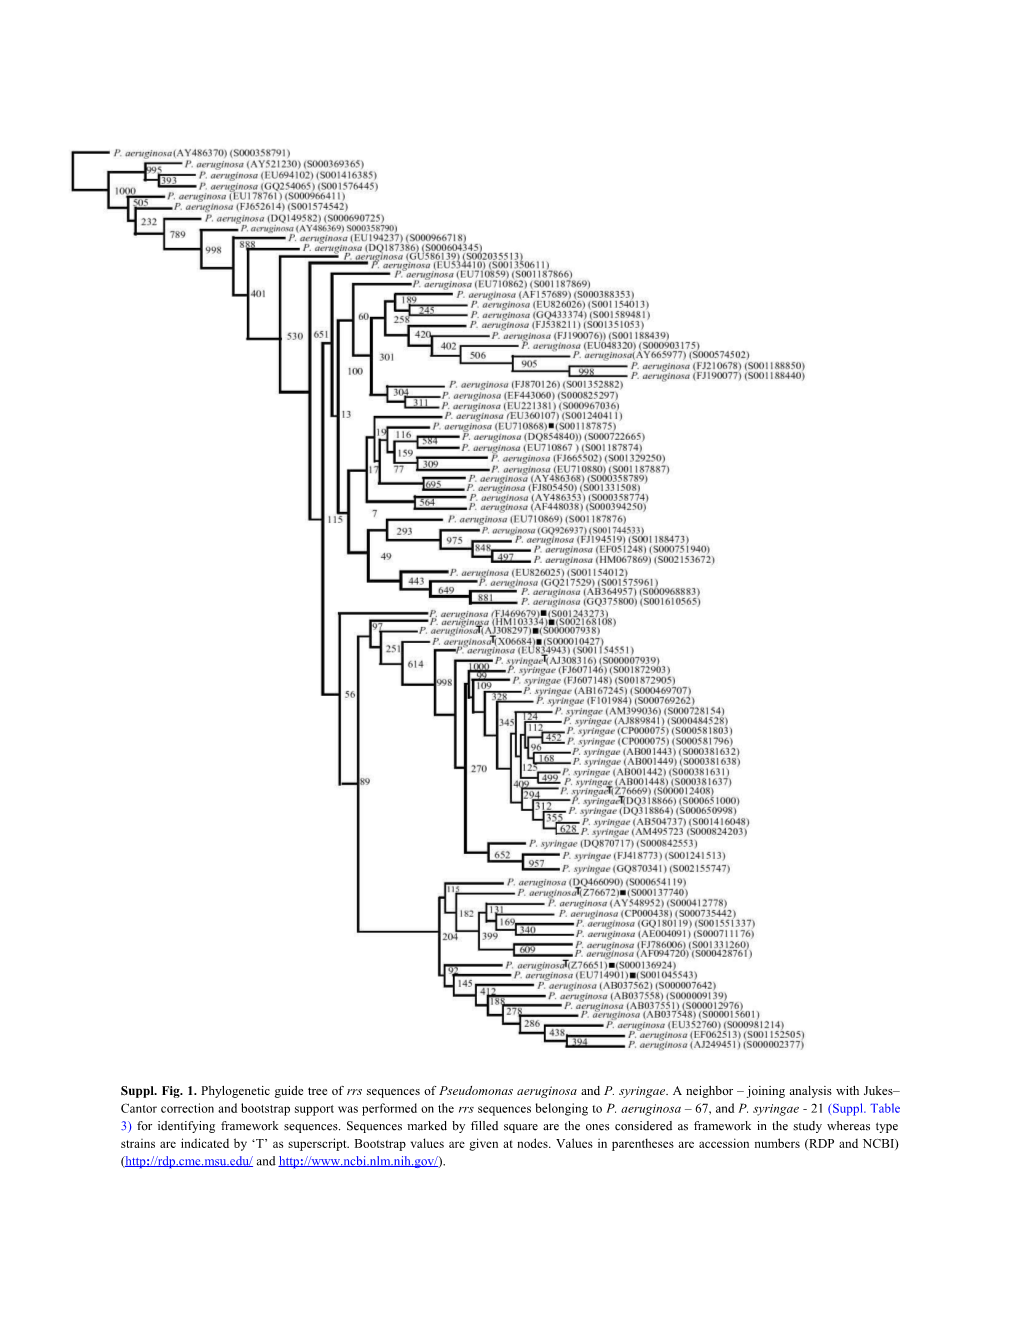 Suppl. Fig. 1. Phylogenetic Guide Tree of Rrs Sequences of Pseudomonas Aeruginosa and P